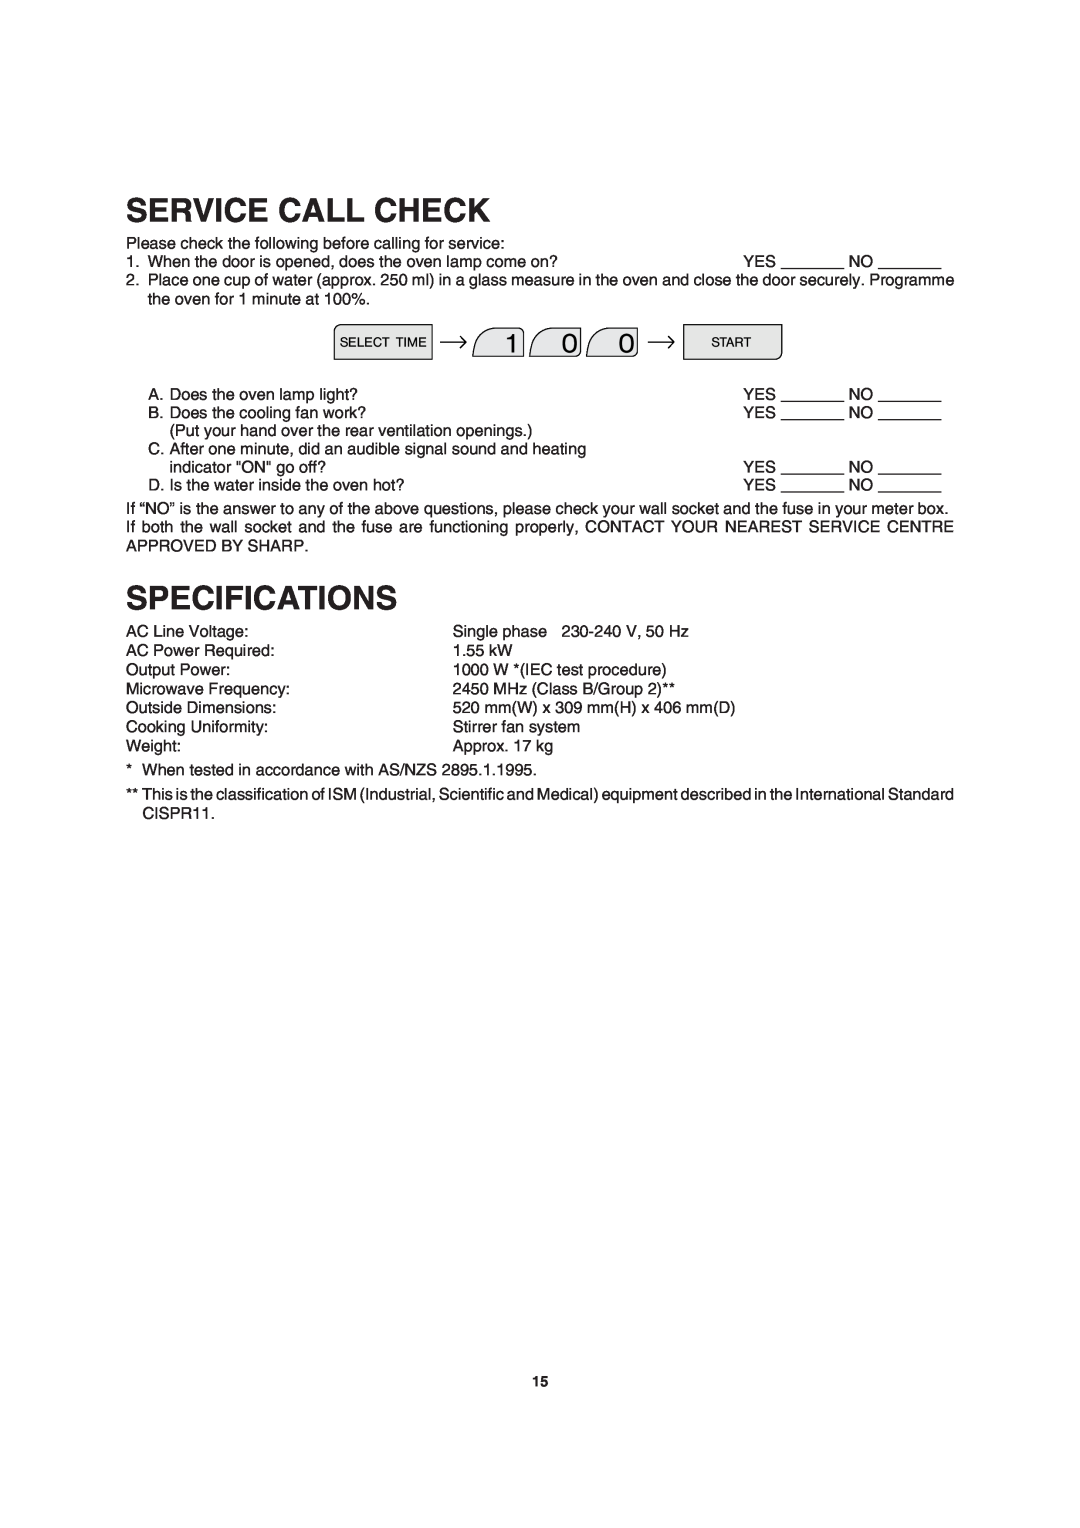 Sharp MODEL R-2197 operation manual Service Call Check, Specifications 